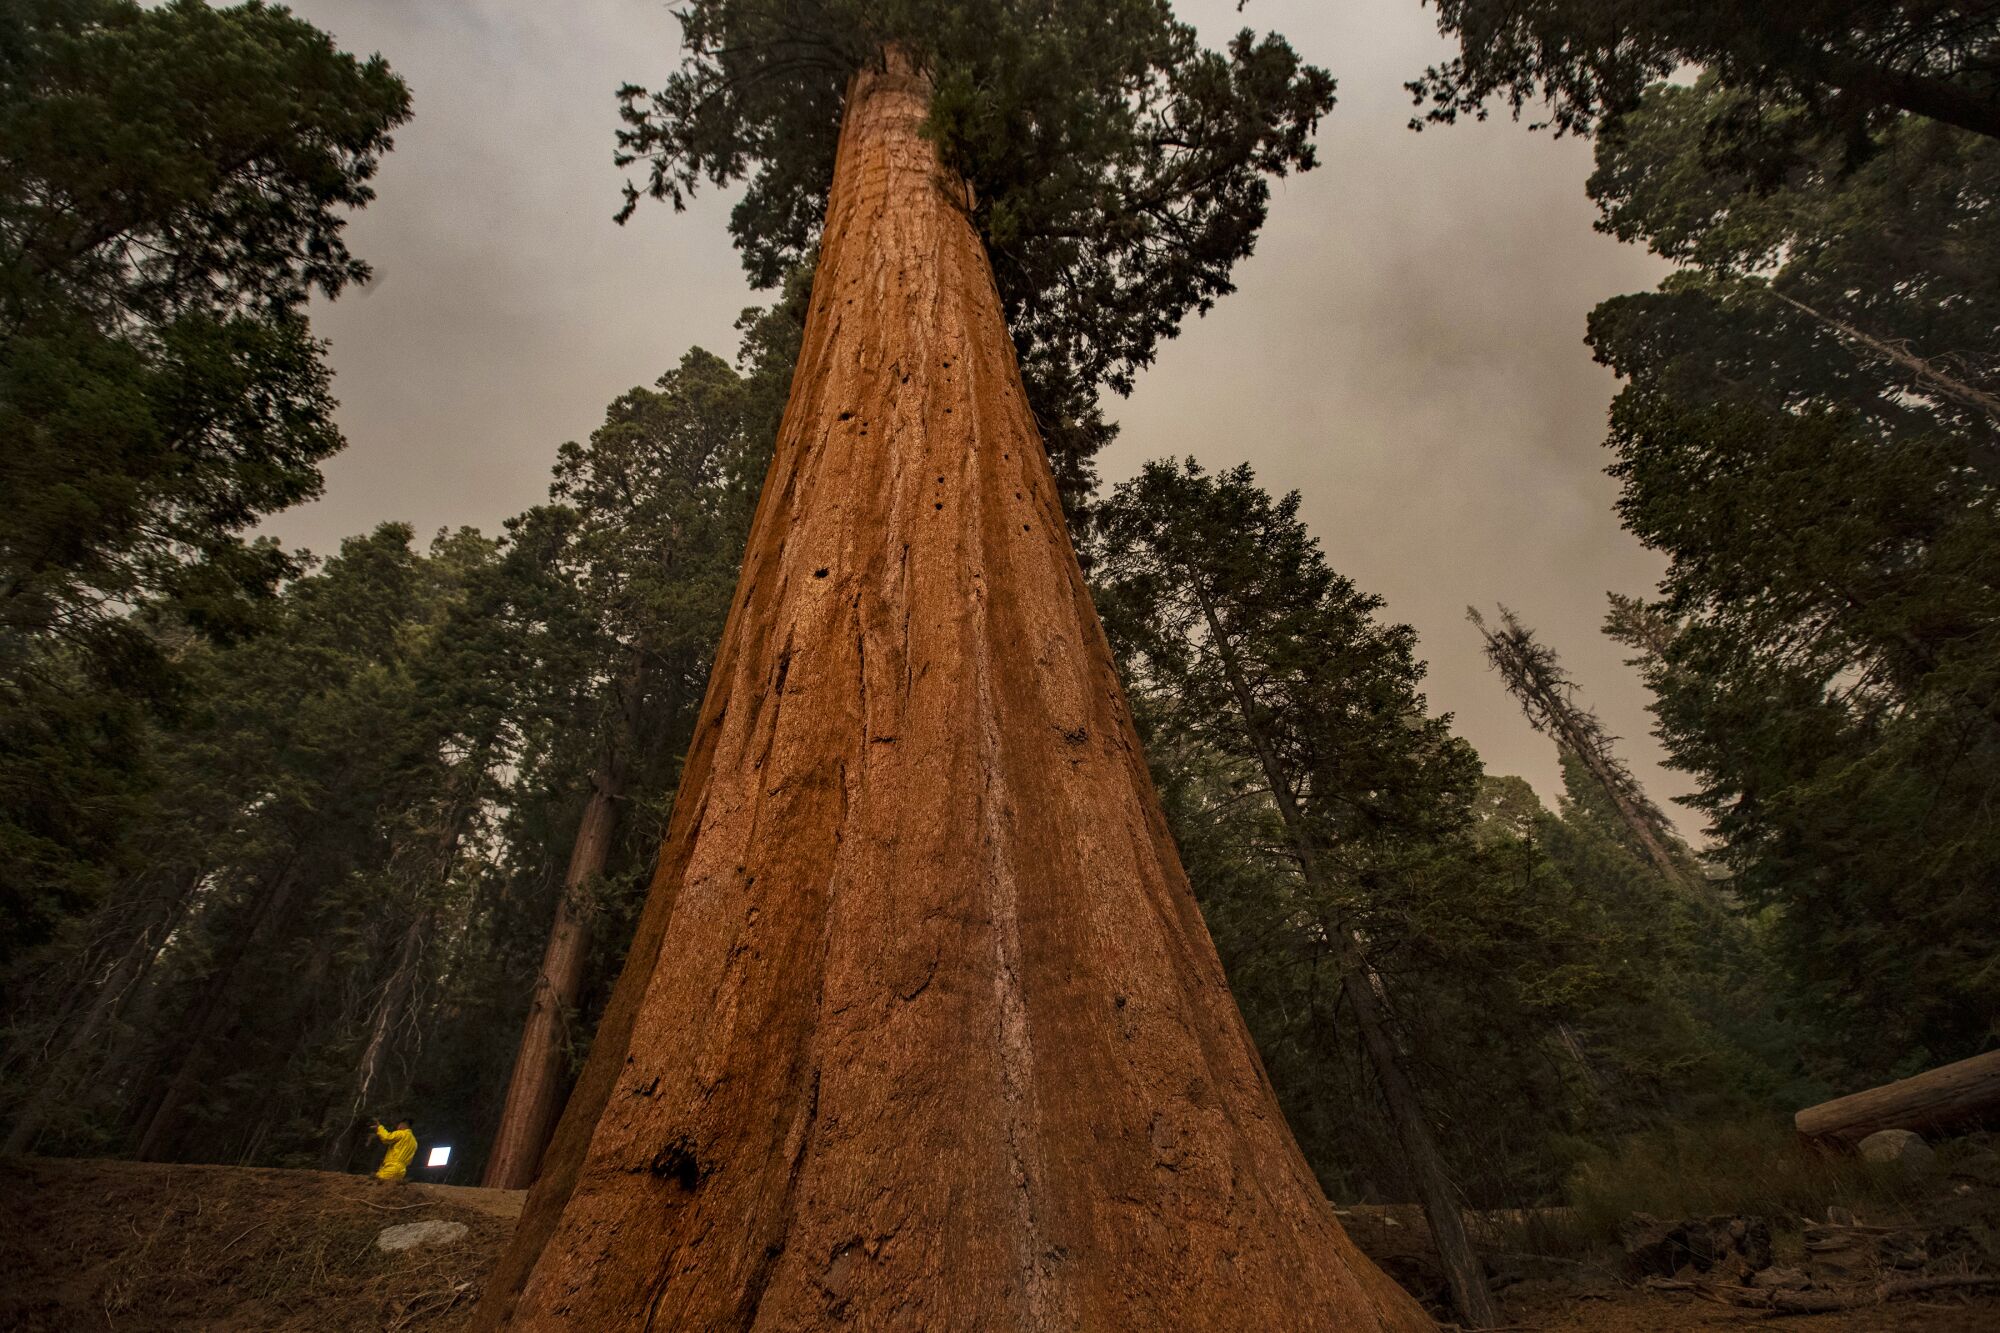 A news crew is seen next to a giant sequoia in a smoky forest